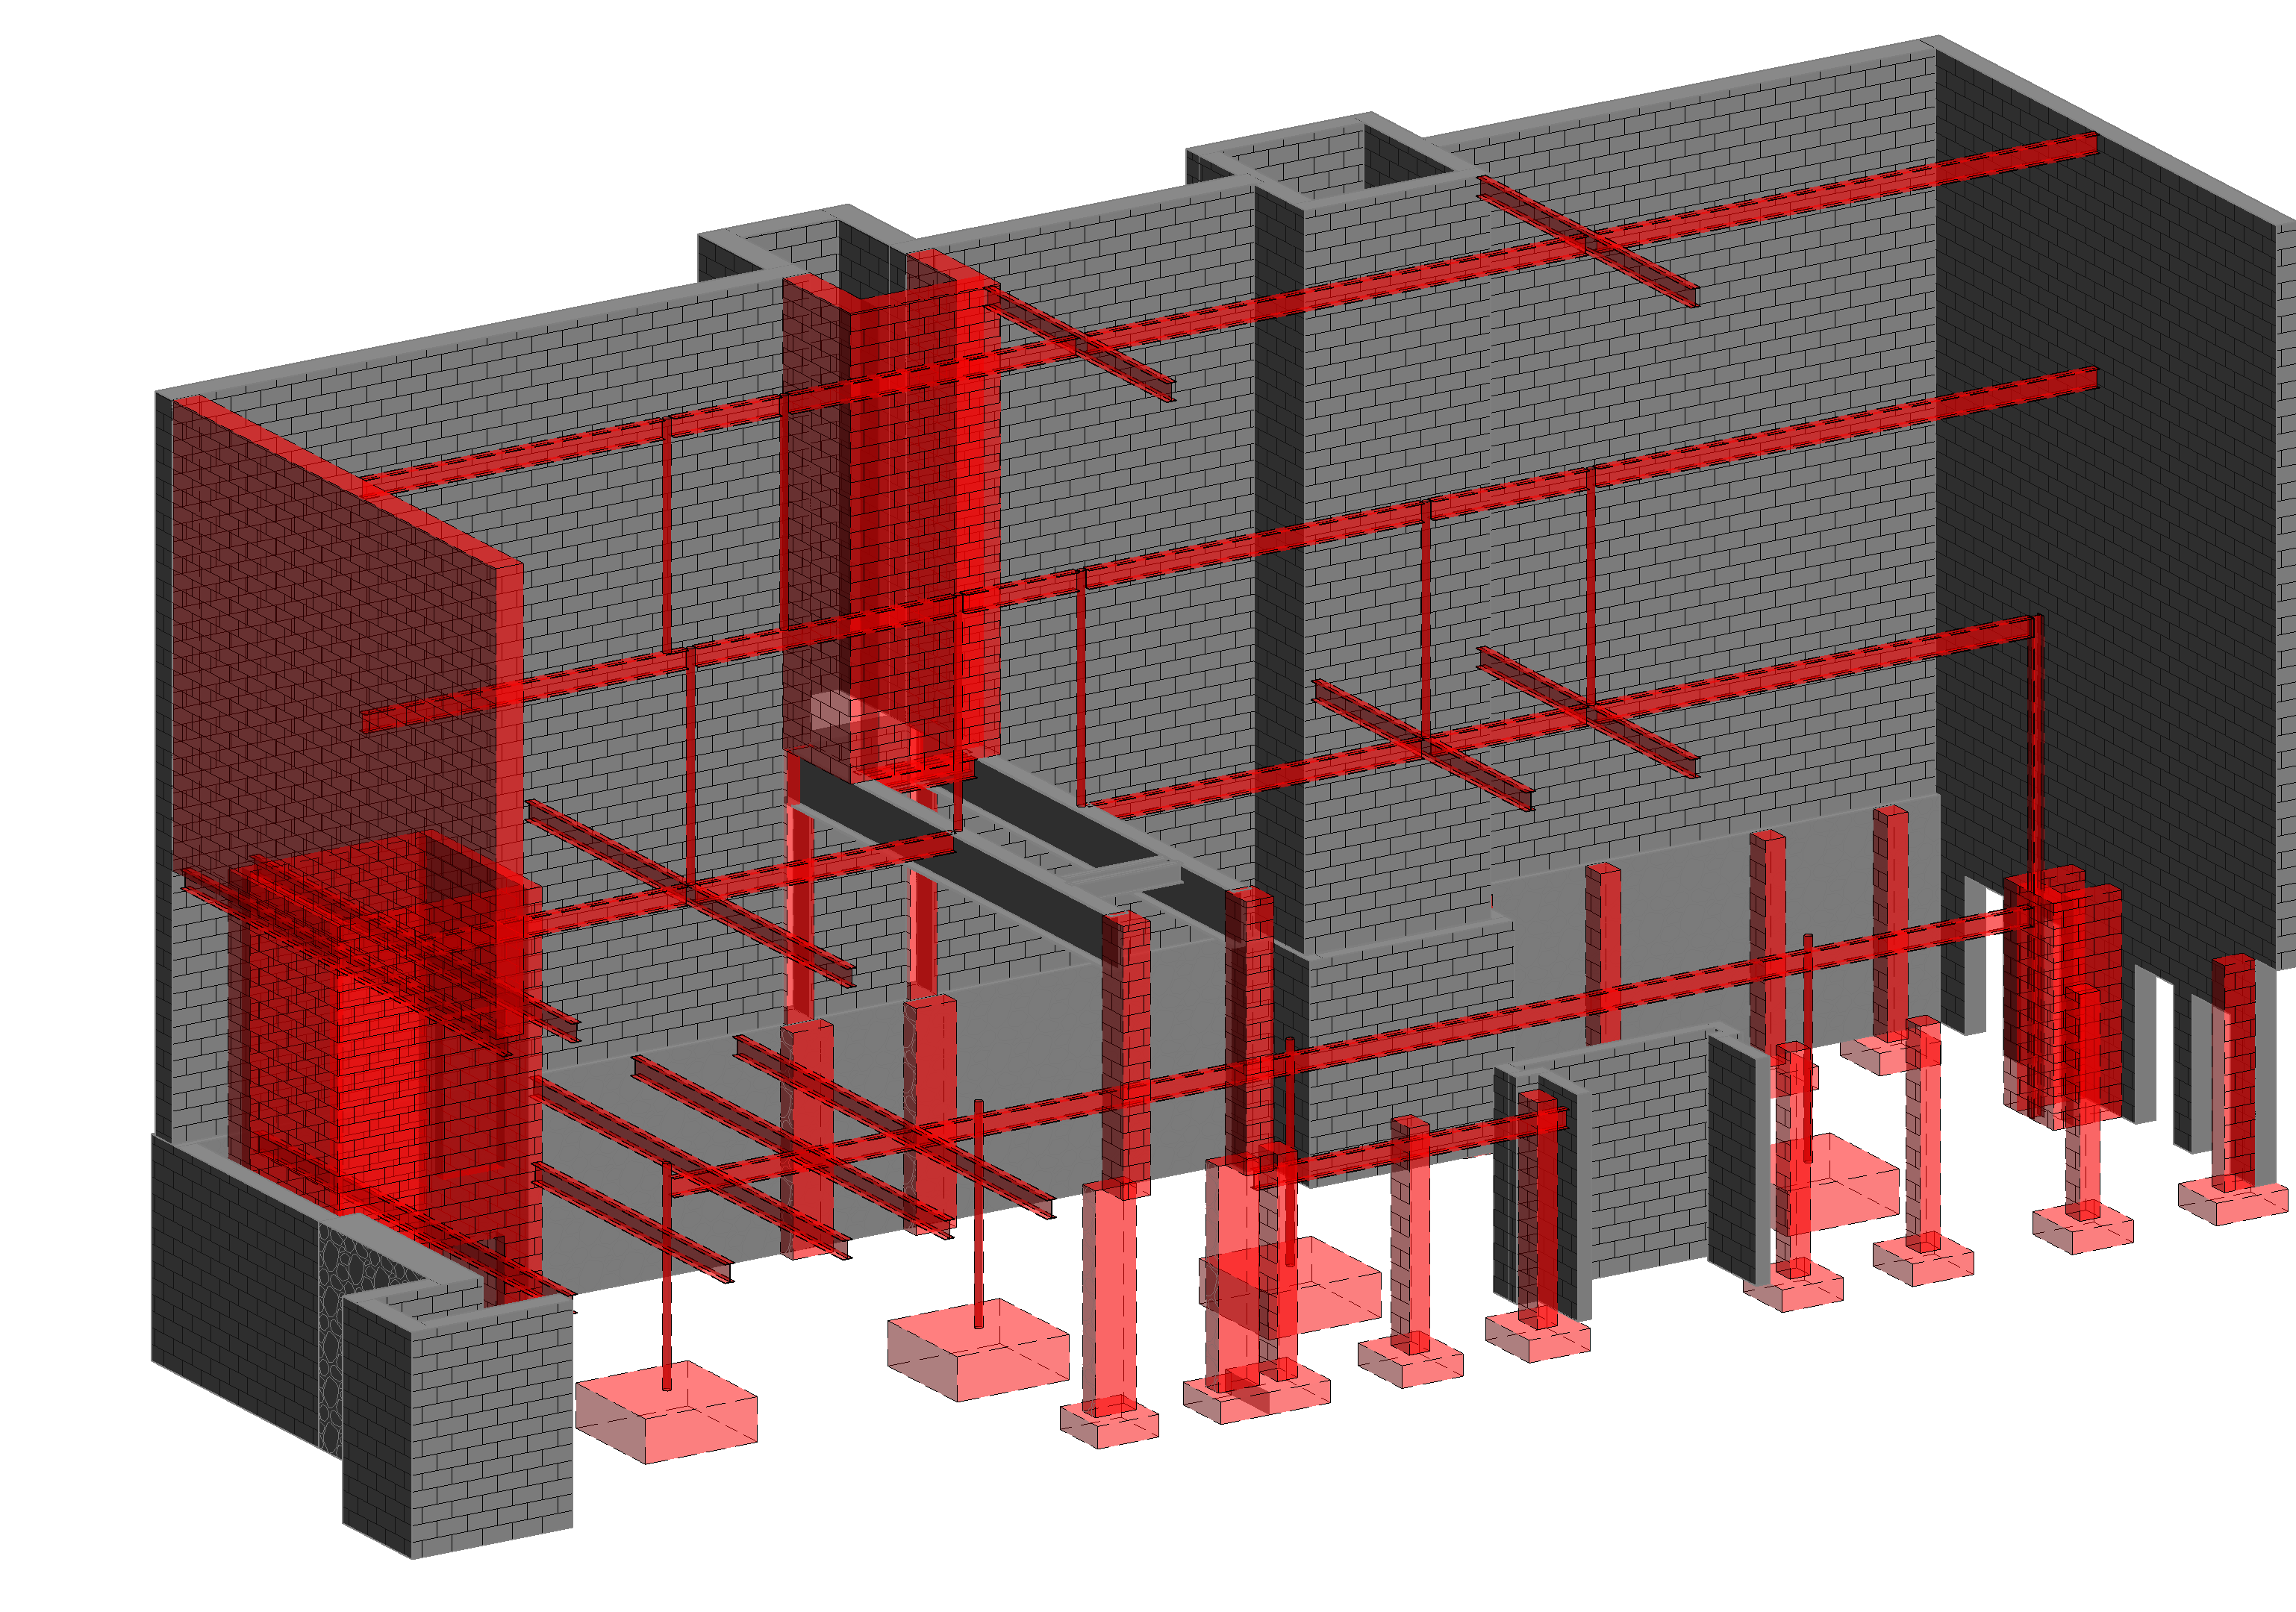 Image of 3D model of the existing building